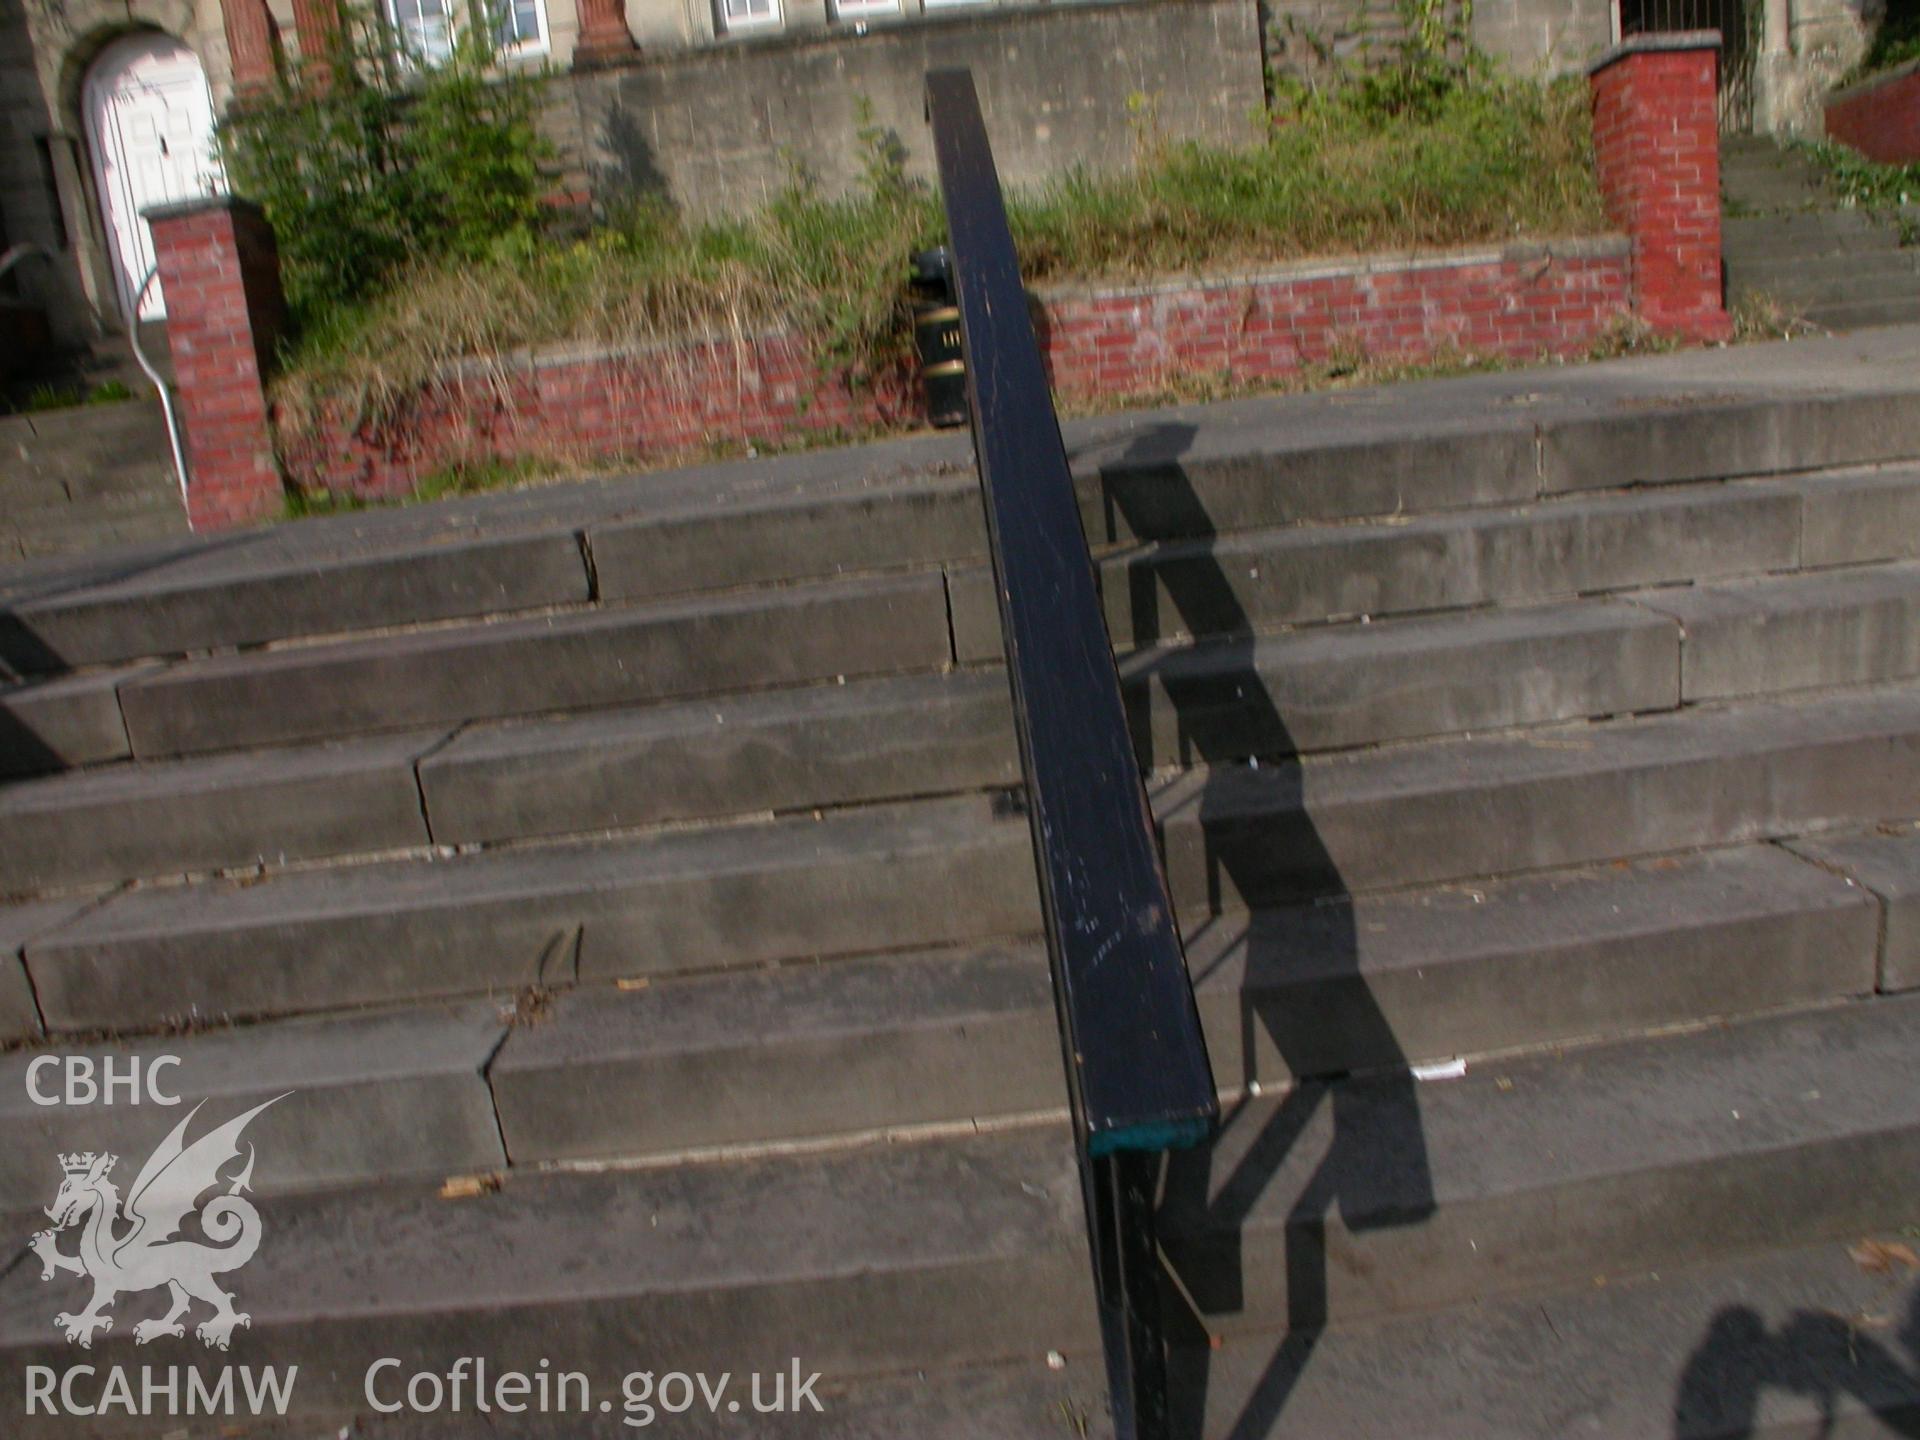 Detailed view of steps leading up to the Merthyr Tydfil War Memorial in Pontmorlais, Merthyr Tydfil. Produced by Geoff Ward of RCAHMW.